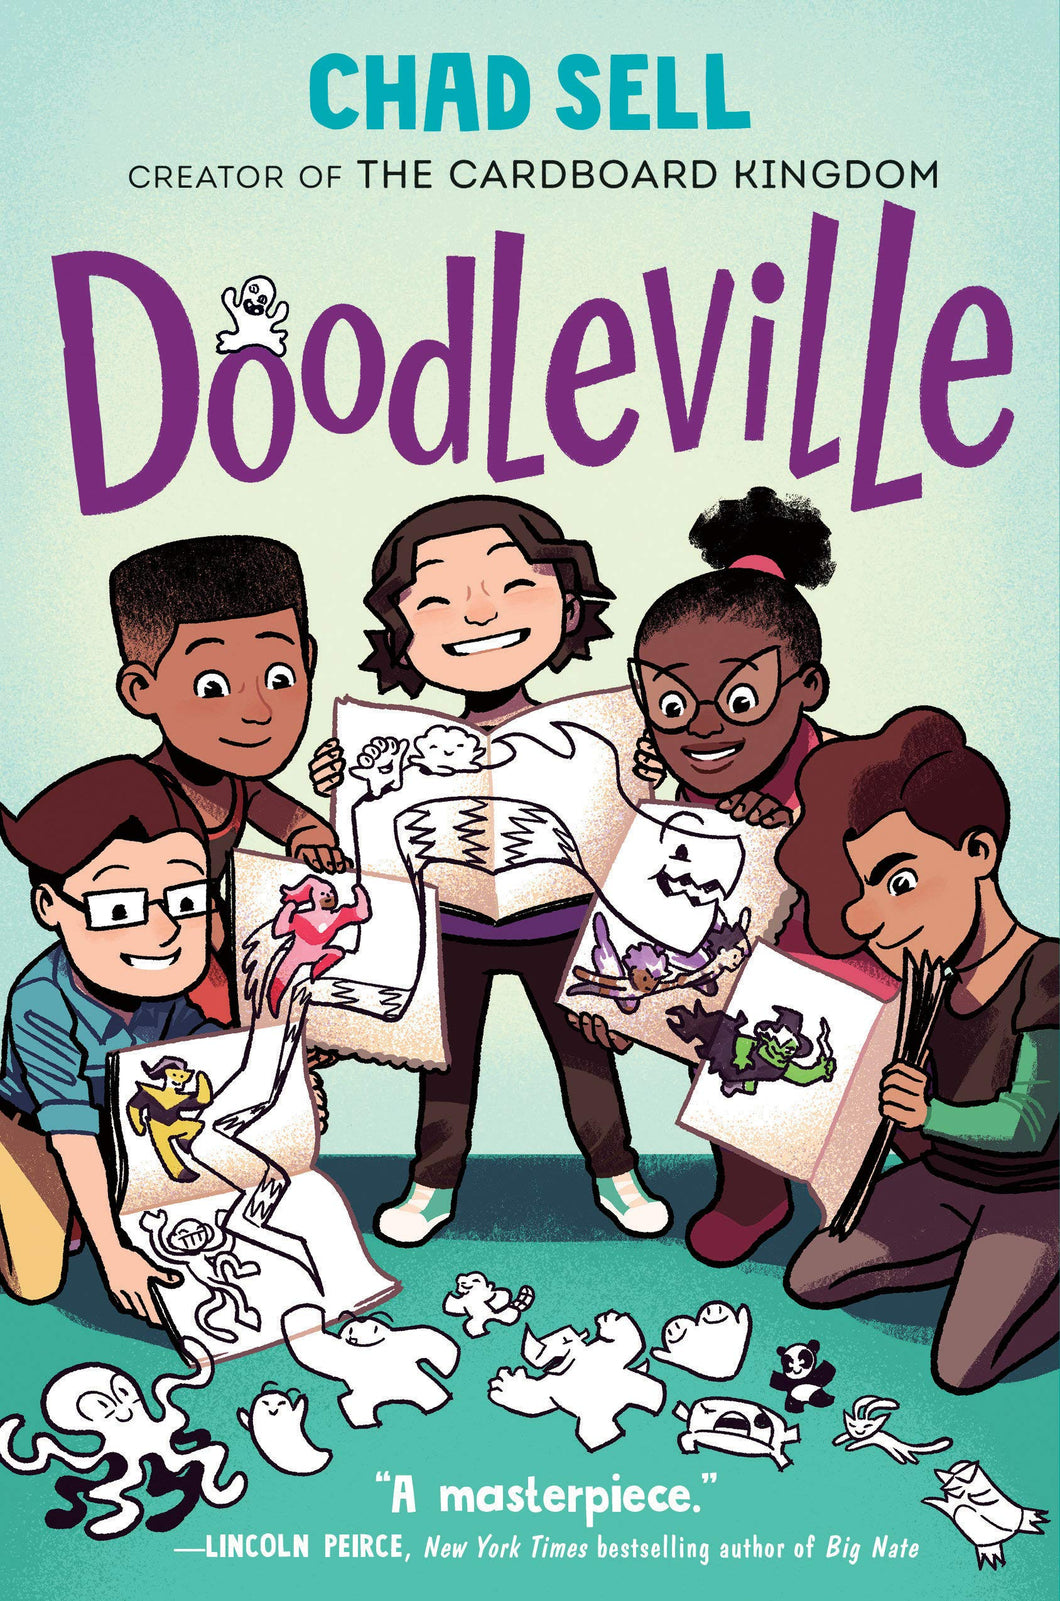 Doodleville by Chad Sell / Hardcover or Paperback - NEW BOOK